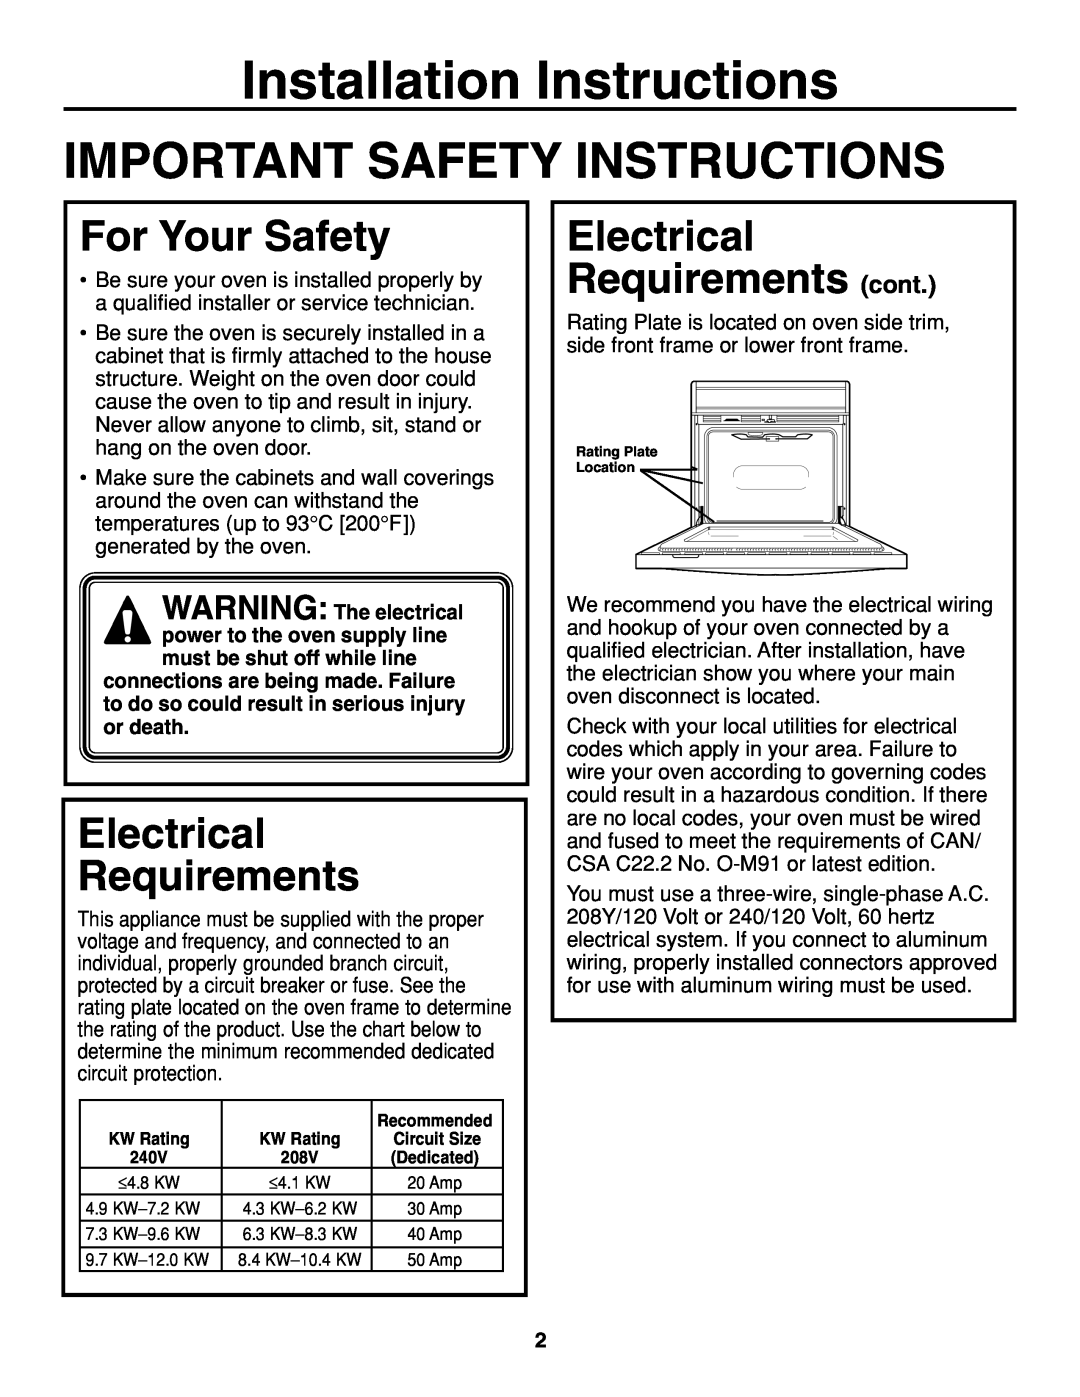 GE JCKP70 Important Safety Instructions, For Your Safety, Electrical Requirements cont, Installation Instructions 